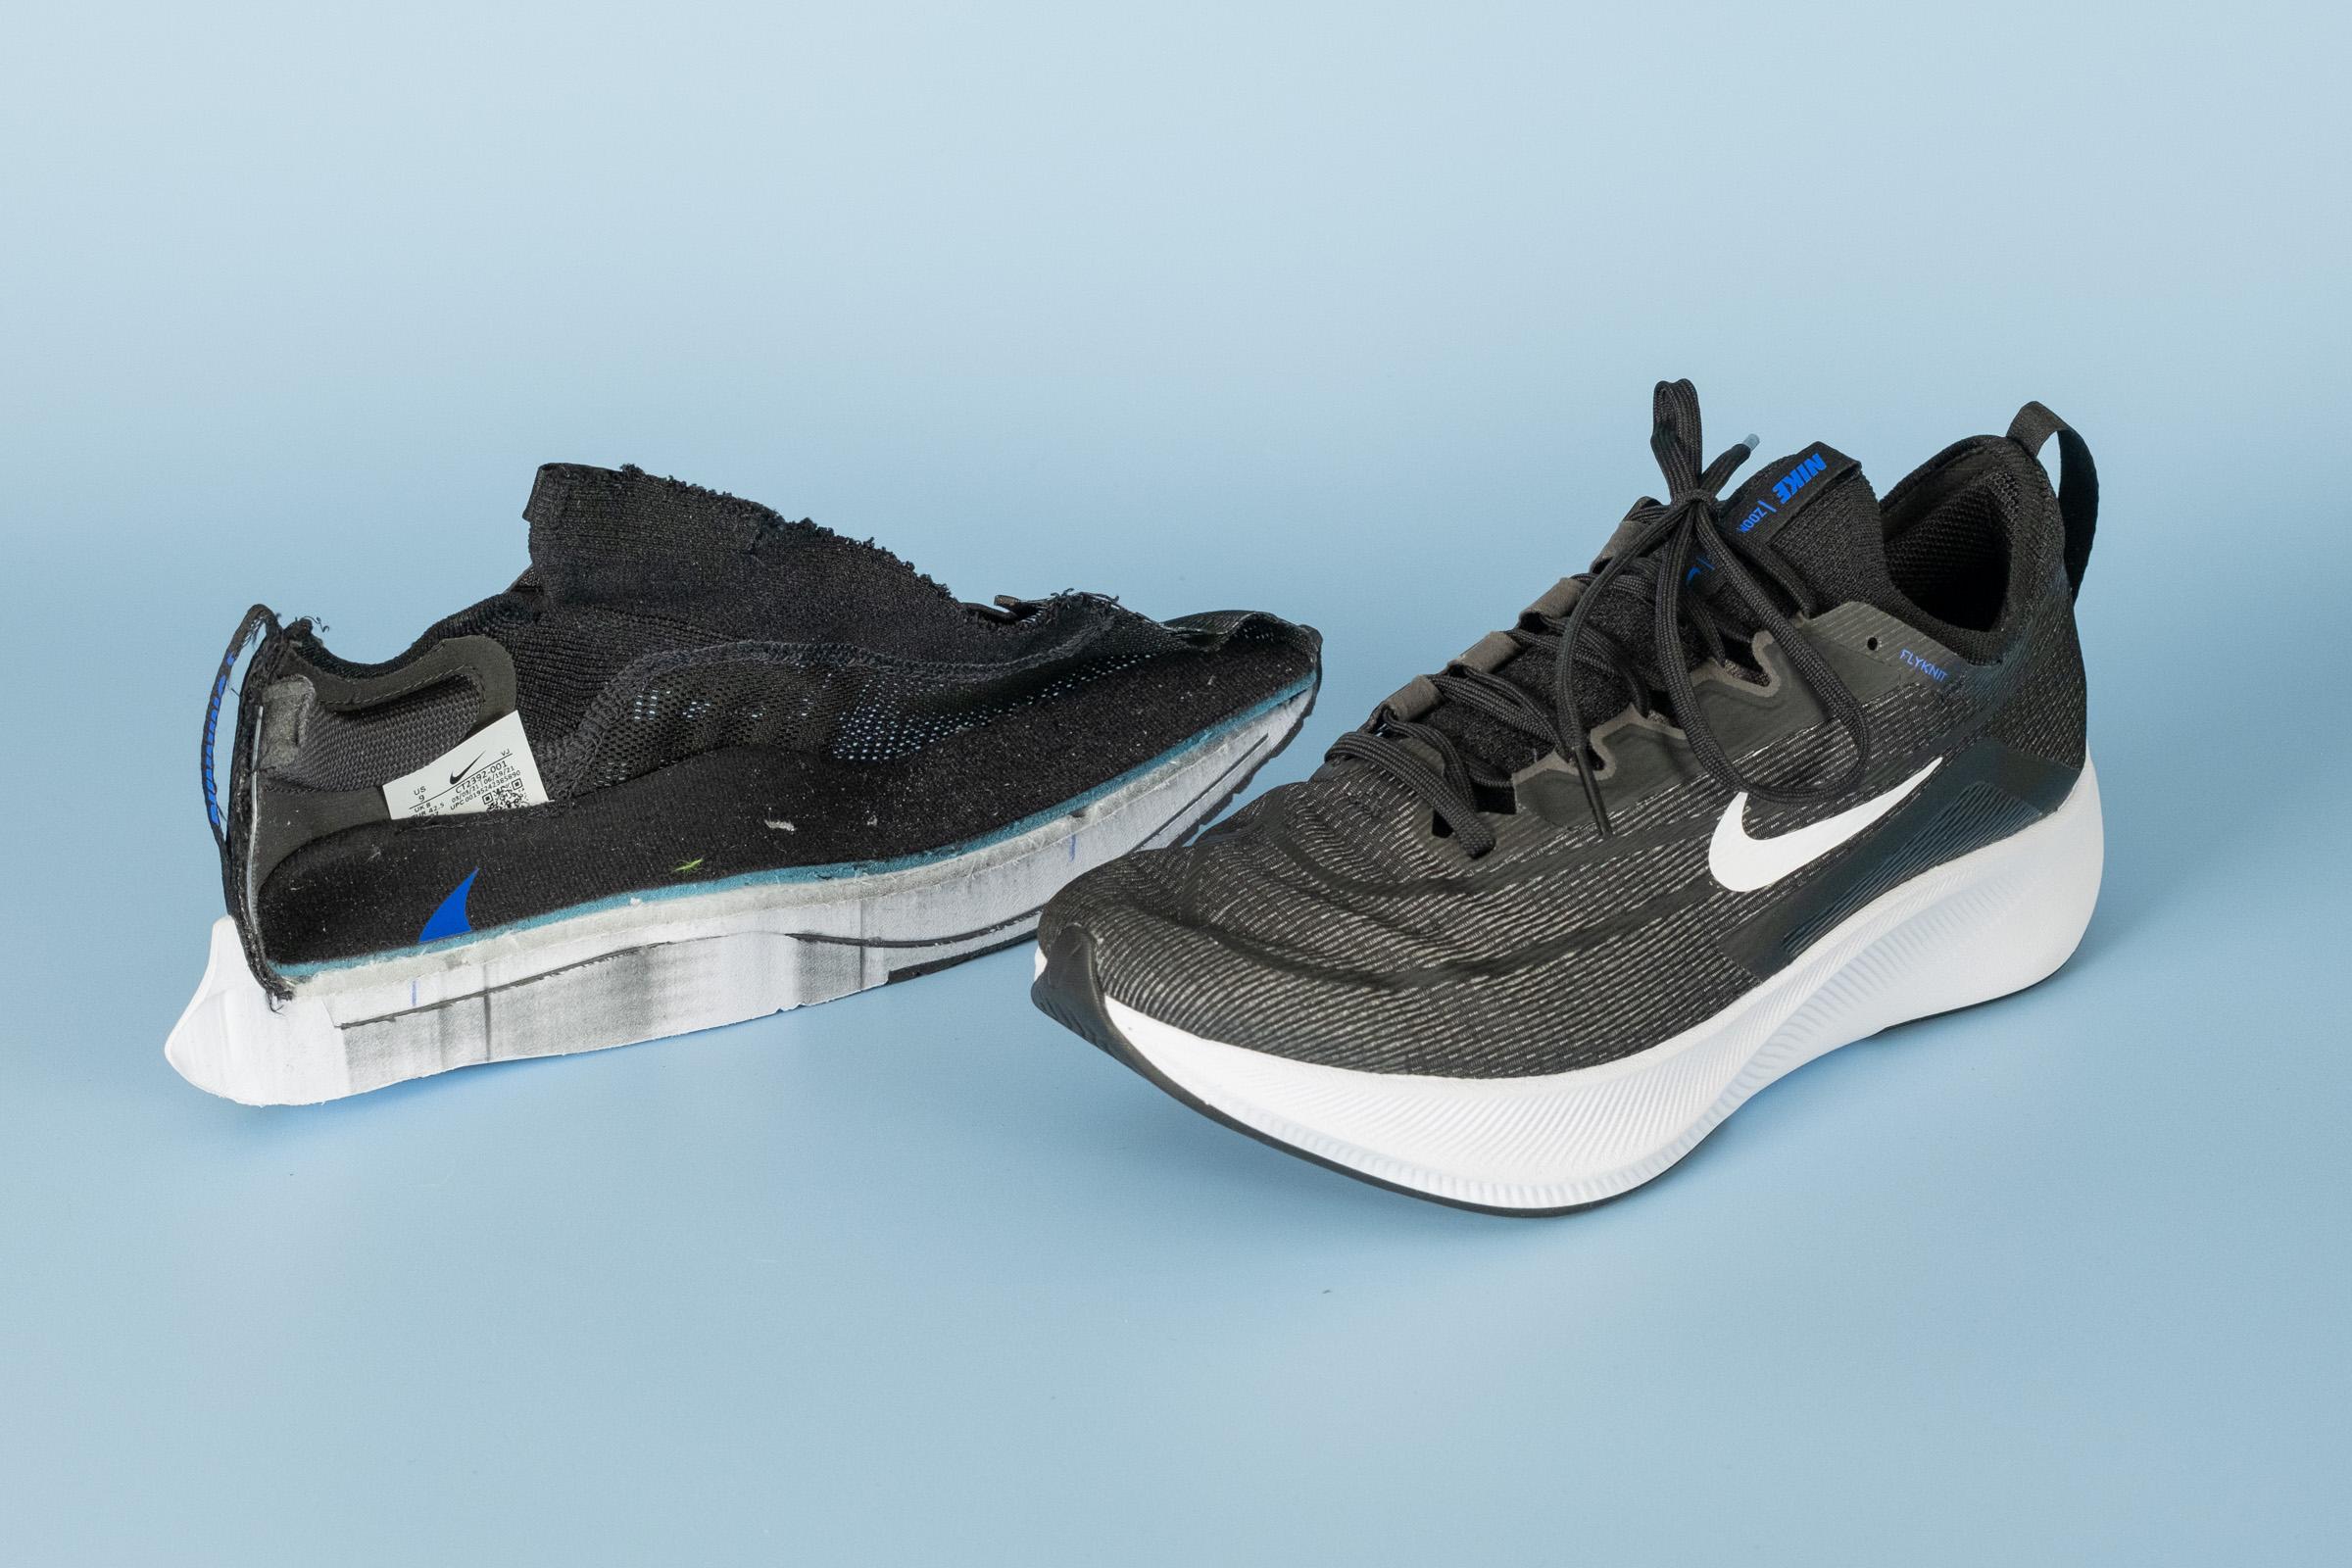 Cut in half: Nike Zoom Fly 4 Review